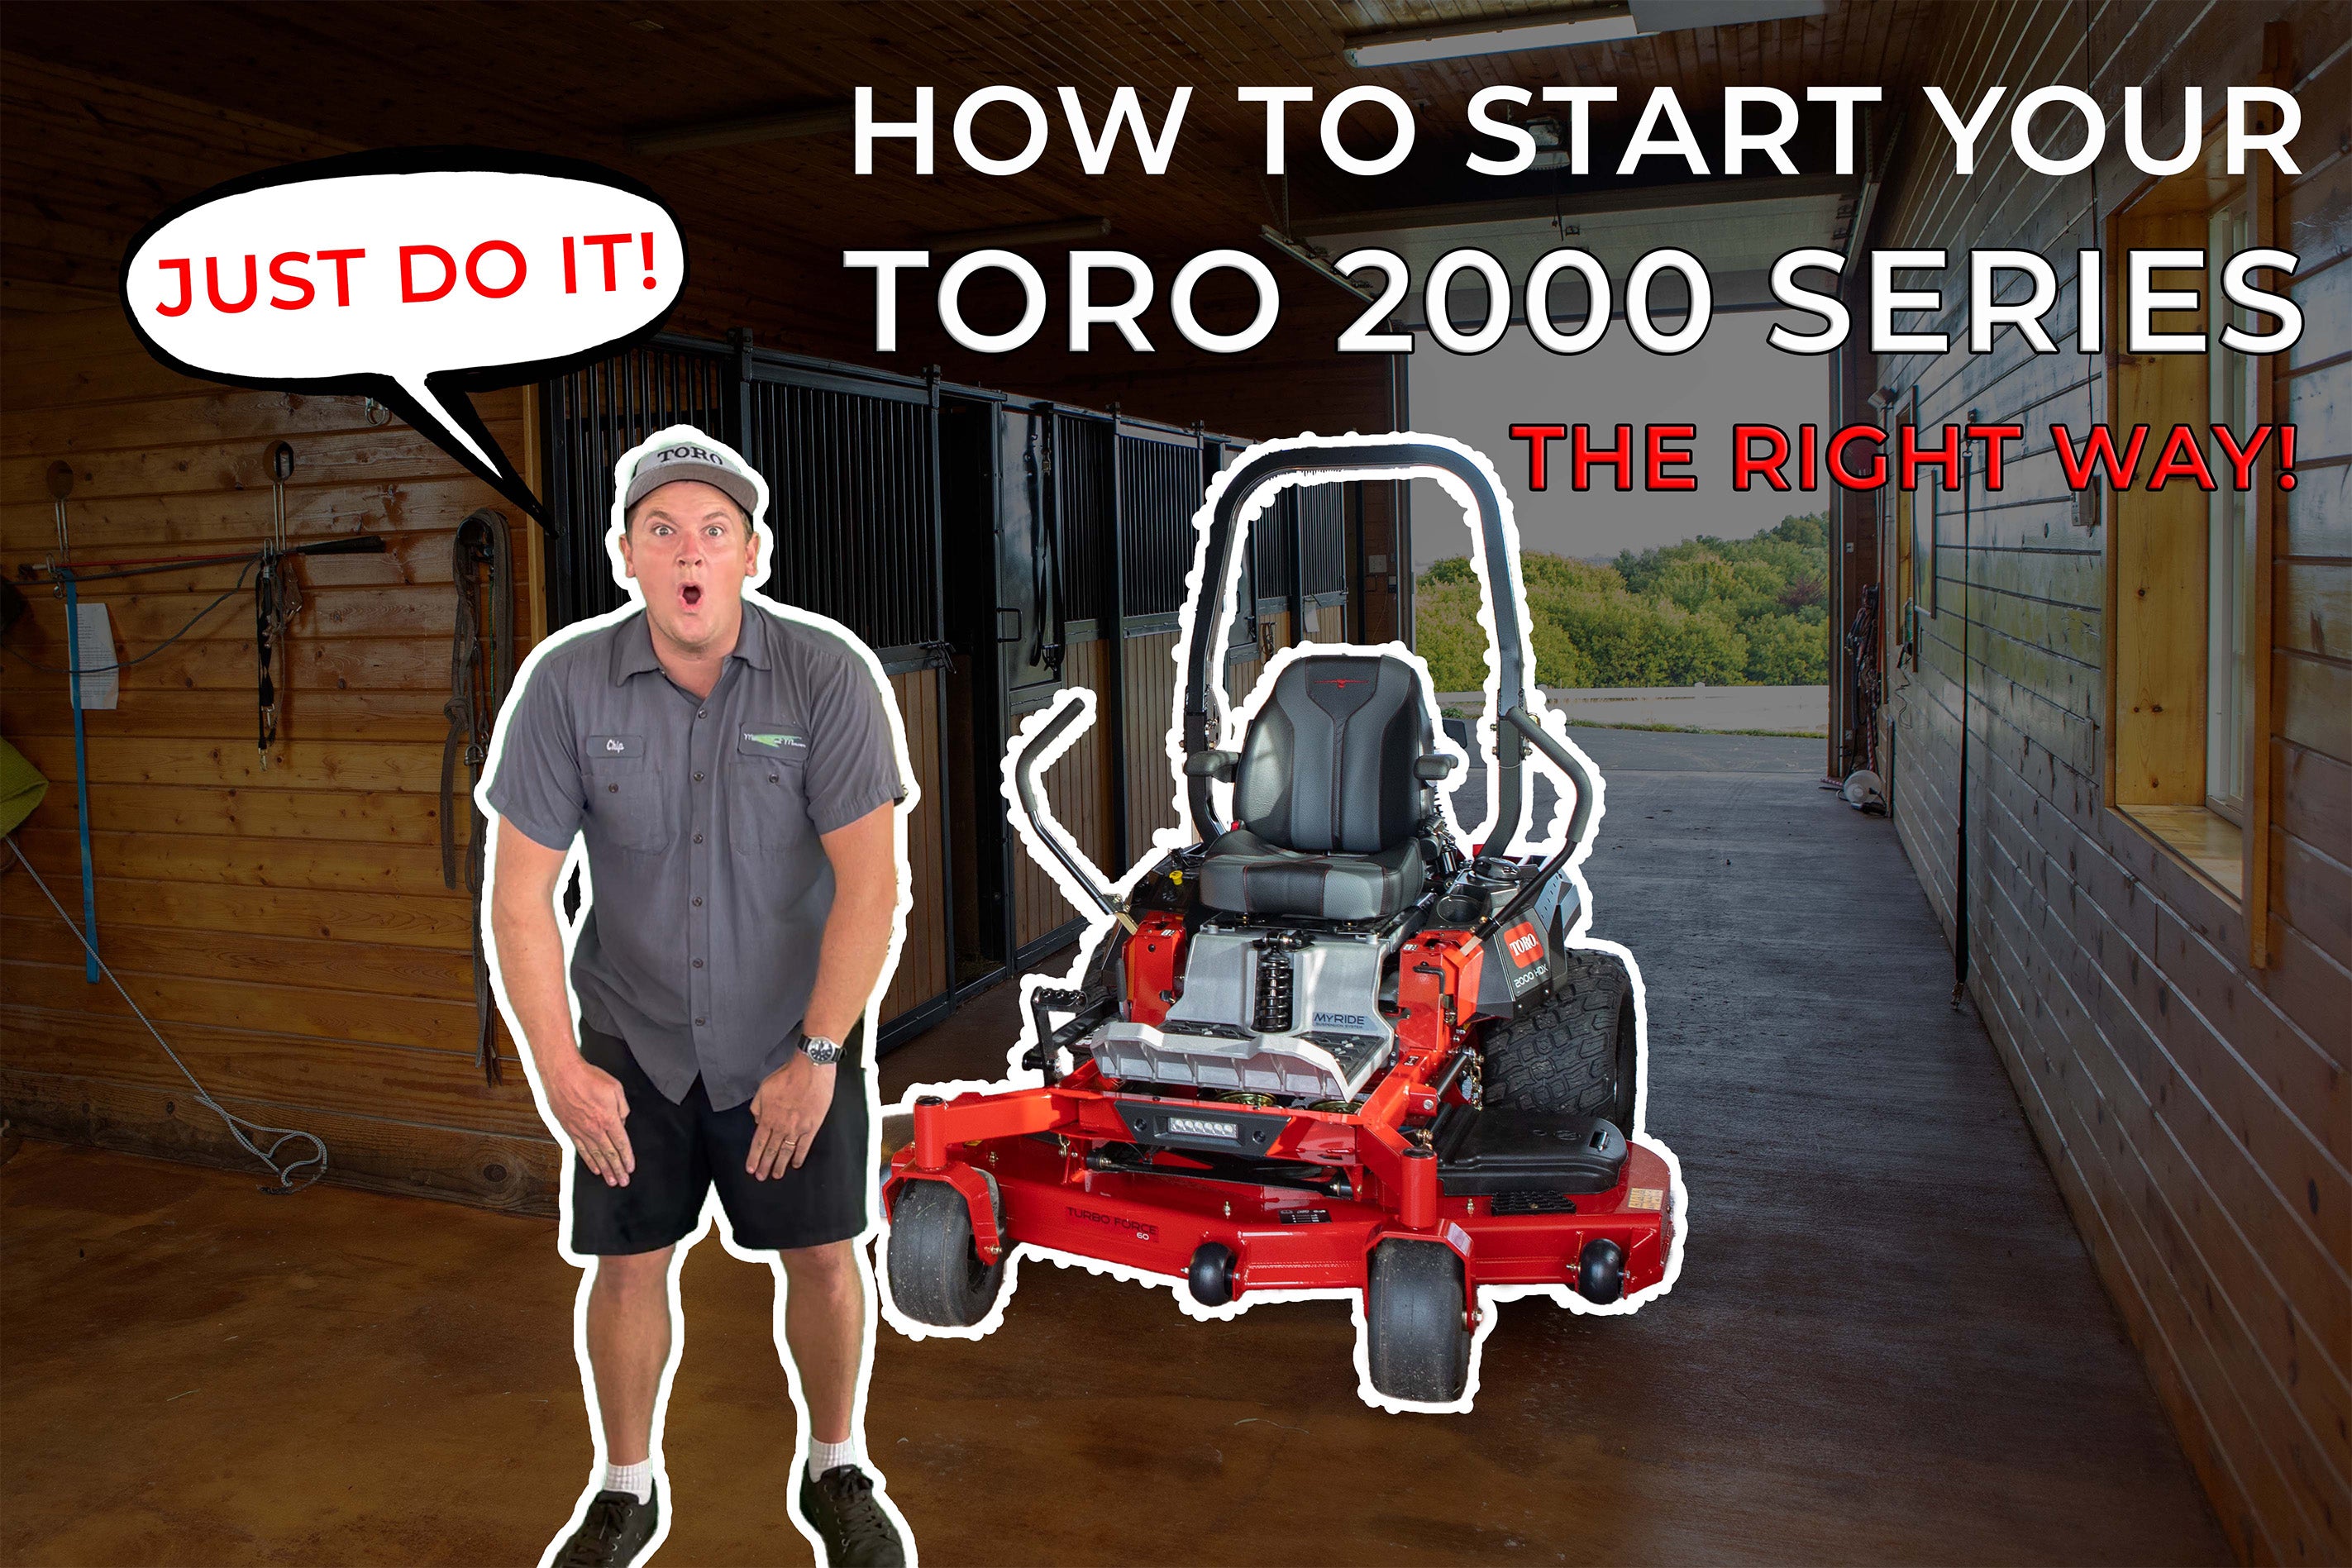 Expert Guide: Initiating Toro 2000 Series Mower - Step-by-Step Instructions